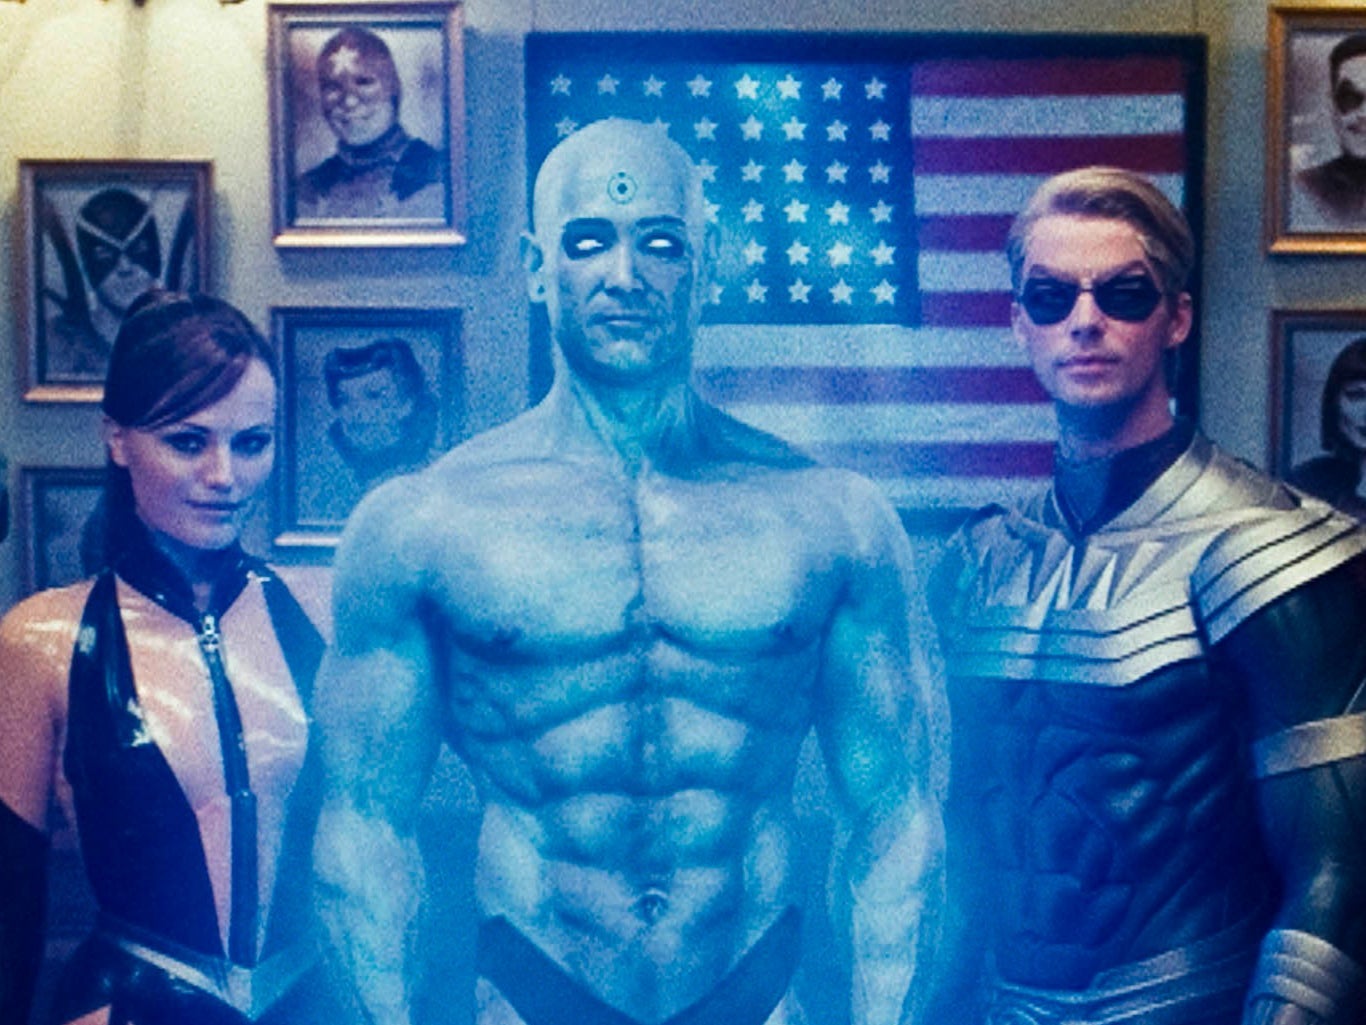 With the arrival of Zack Snyder’s four-hour cut of ‘Justice League’ , it’s time to reassess his 2009 ‘Watchmen’ adaptation as the right film at the wrong time